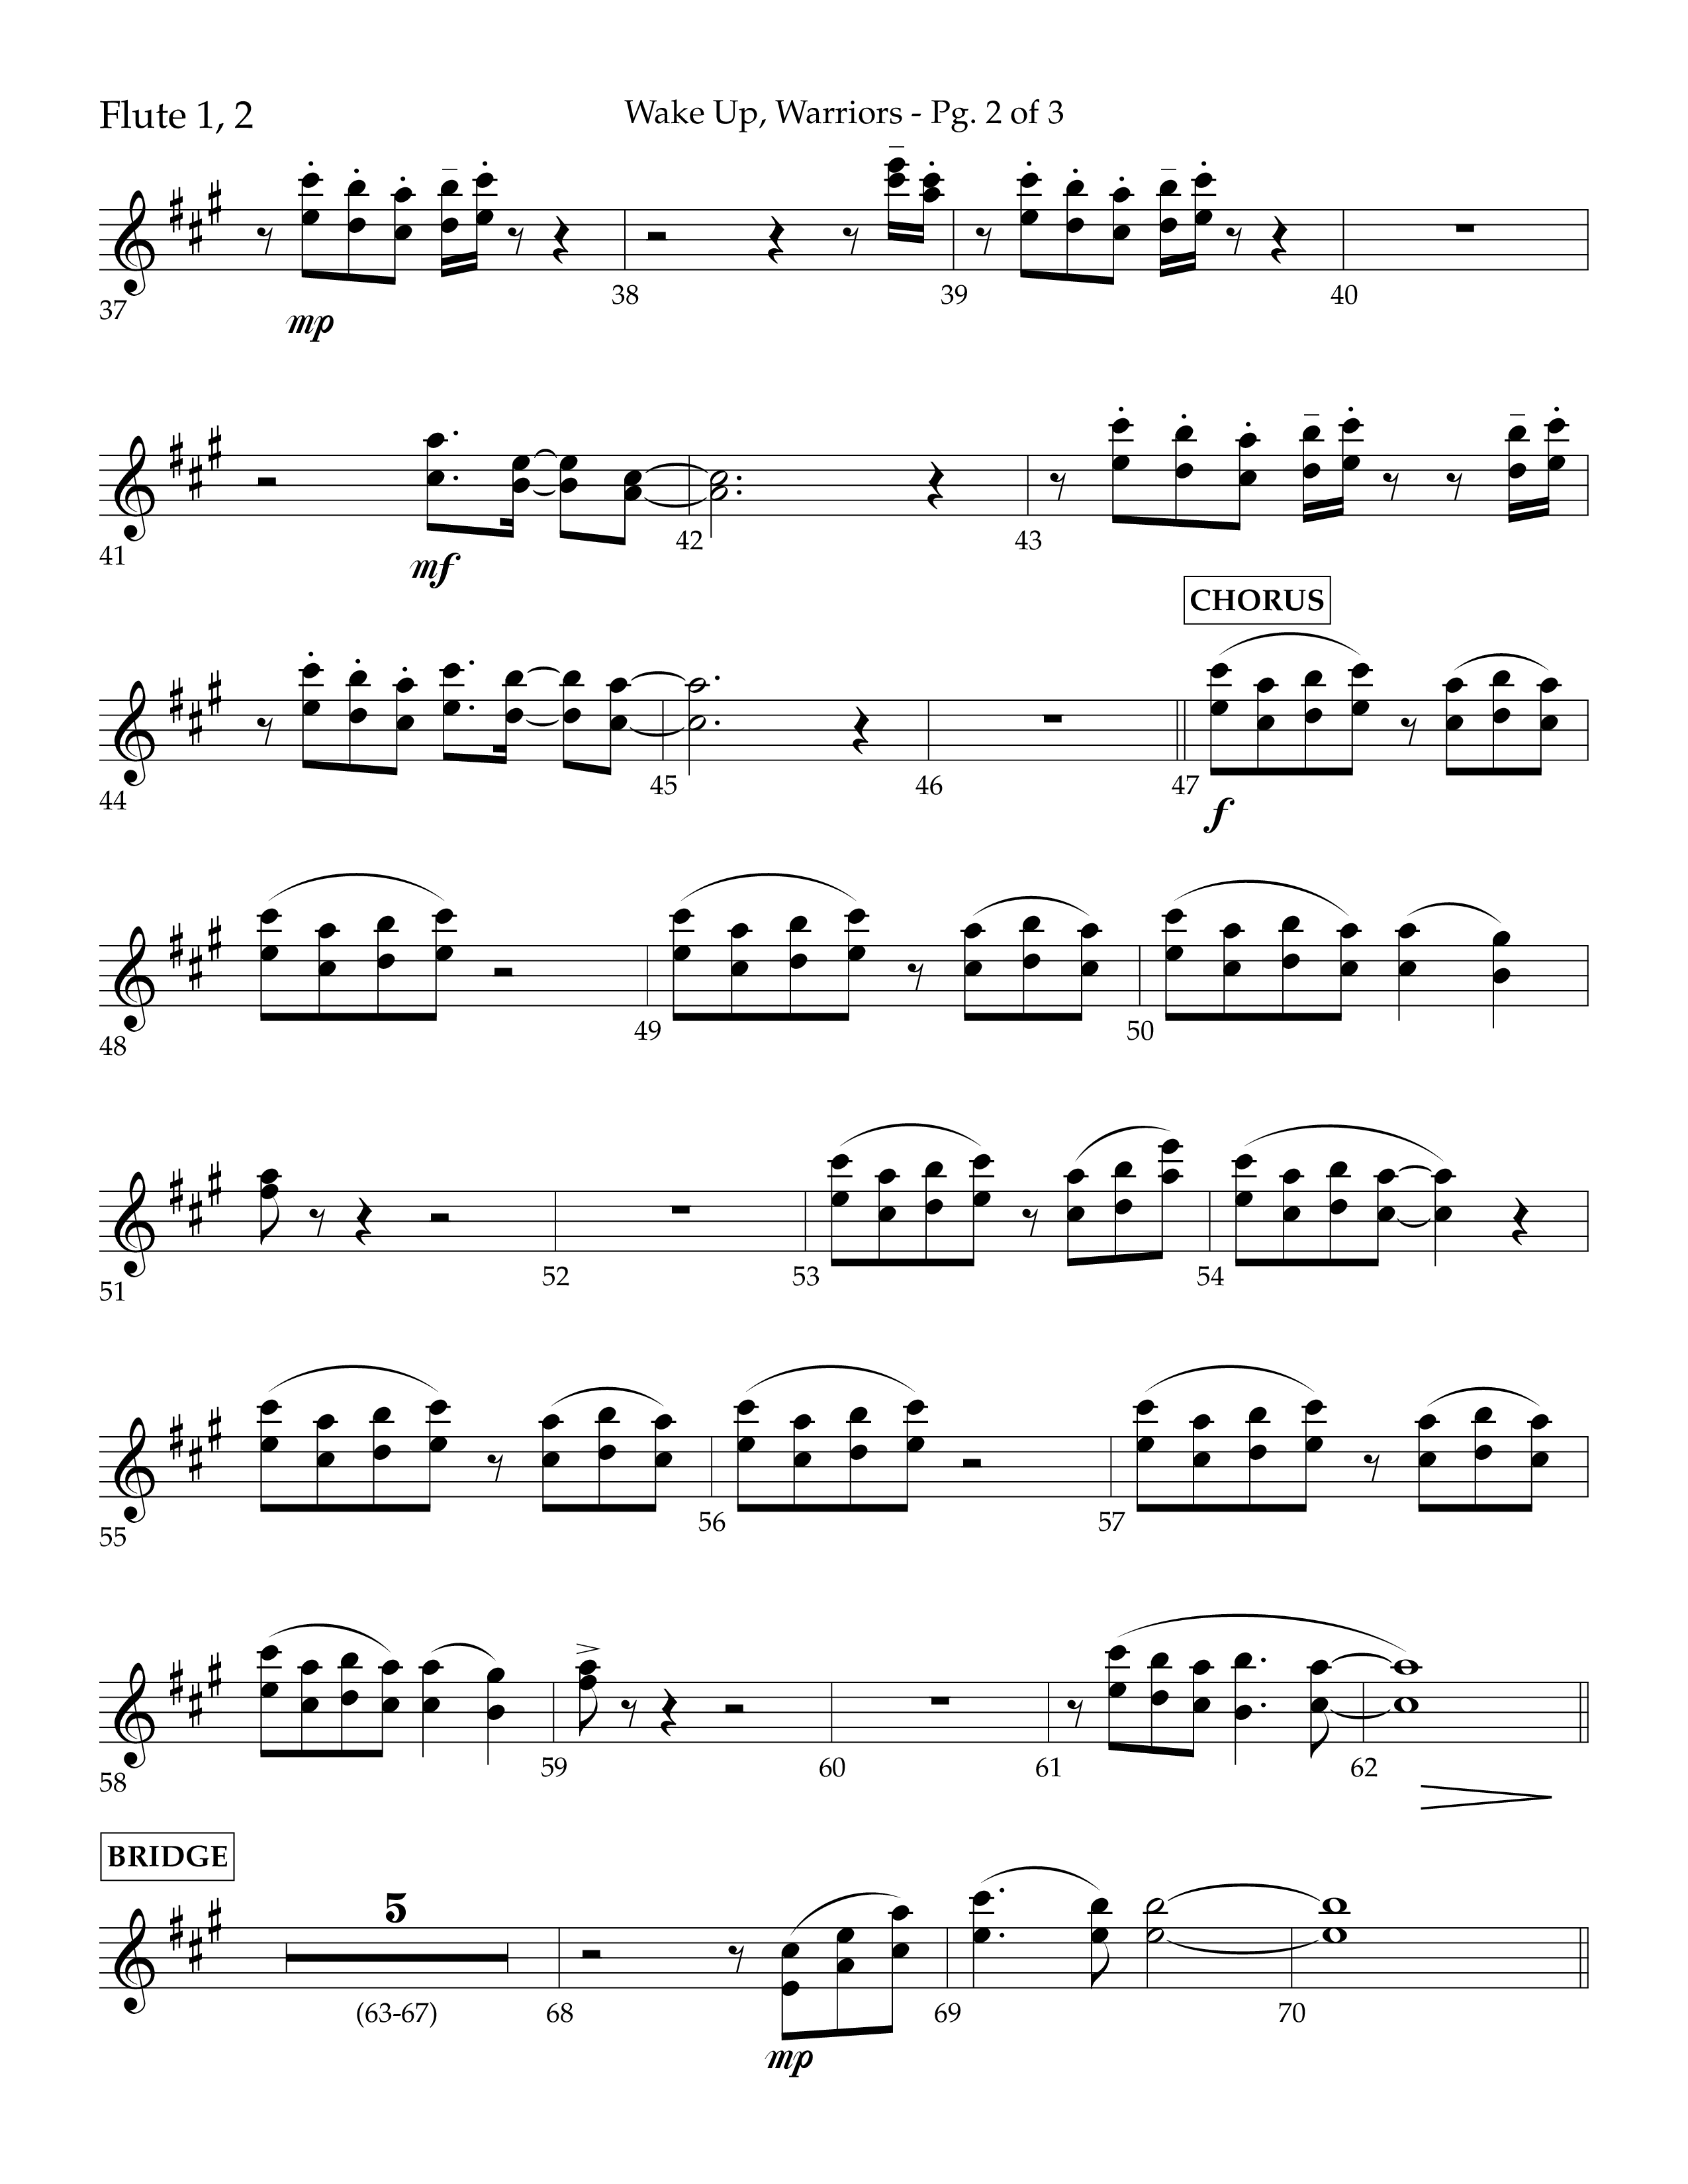 Wake Up Warriors (Choral Anthem SATB) Flute 1/2 (Lifeway Choral / Arr. John Bolin / Orch. Tim Cates)